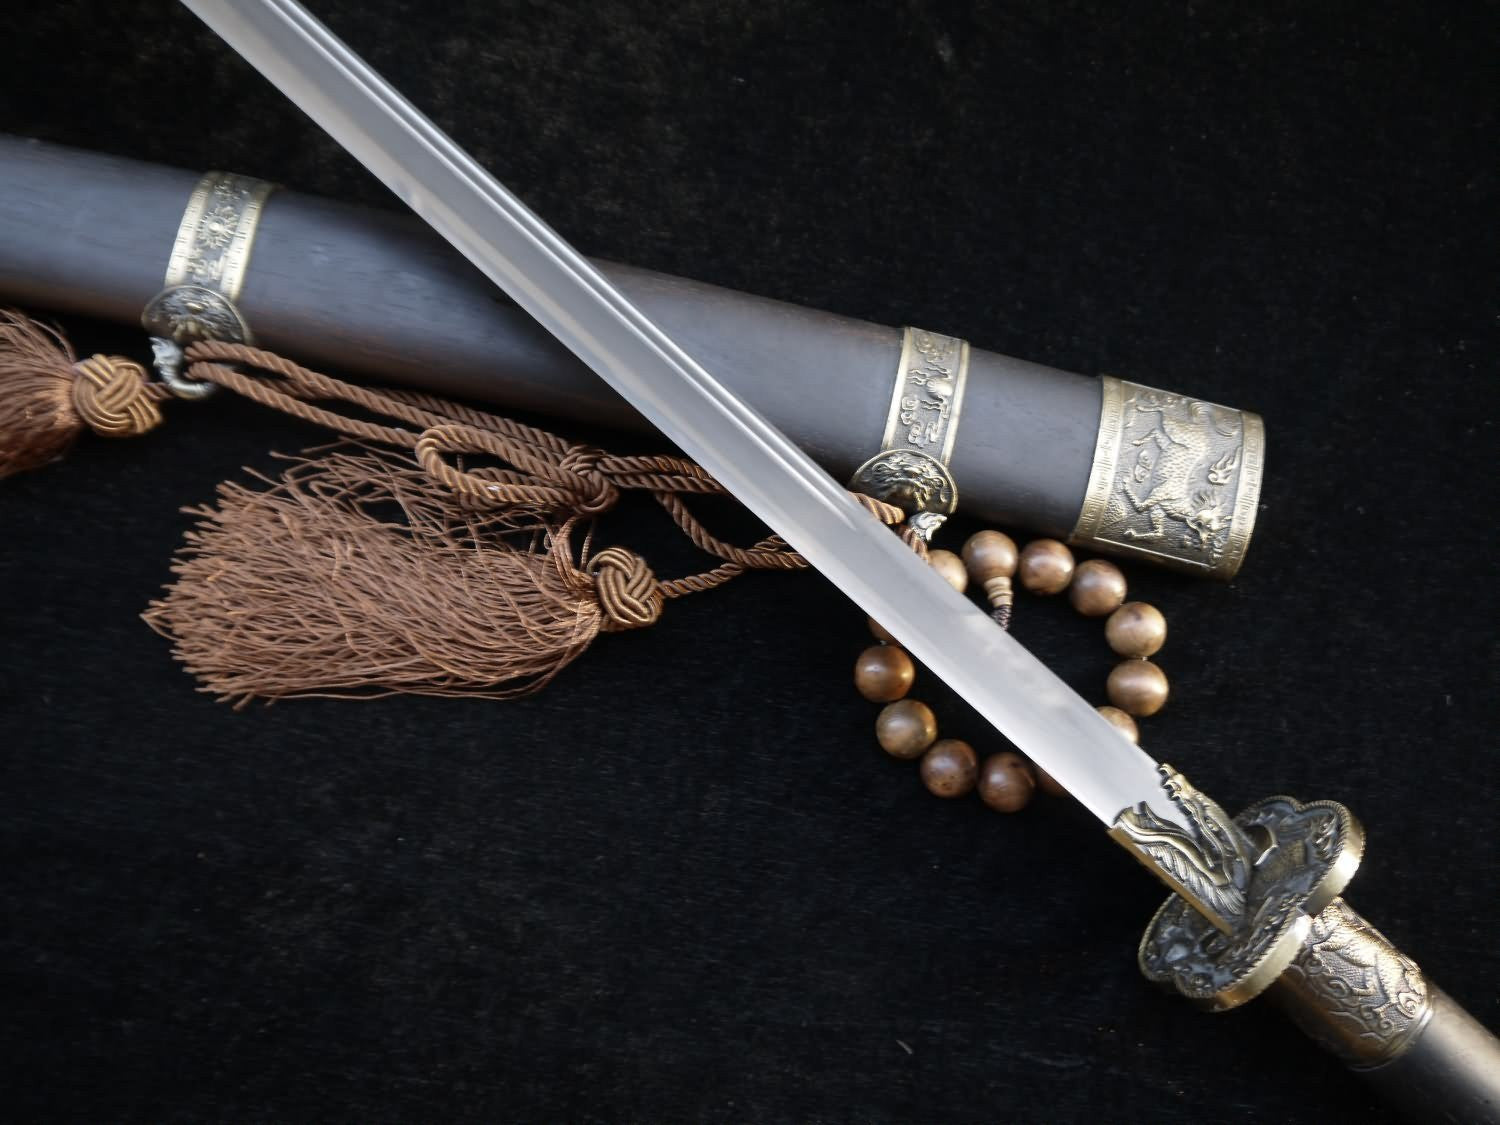 Qing Dynasty broadsword-Damascus steel-Rosewood scabbard-Brass fittings - Chinese sword shop